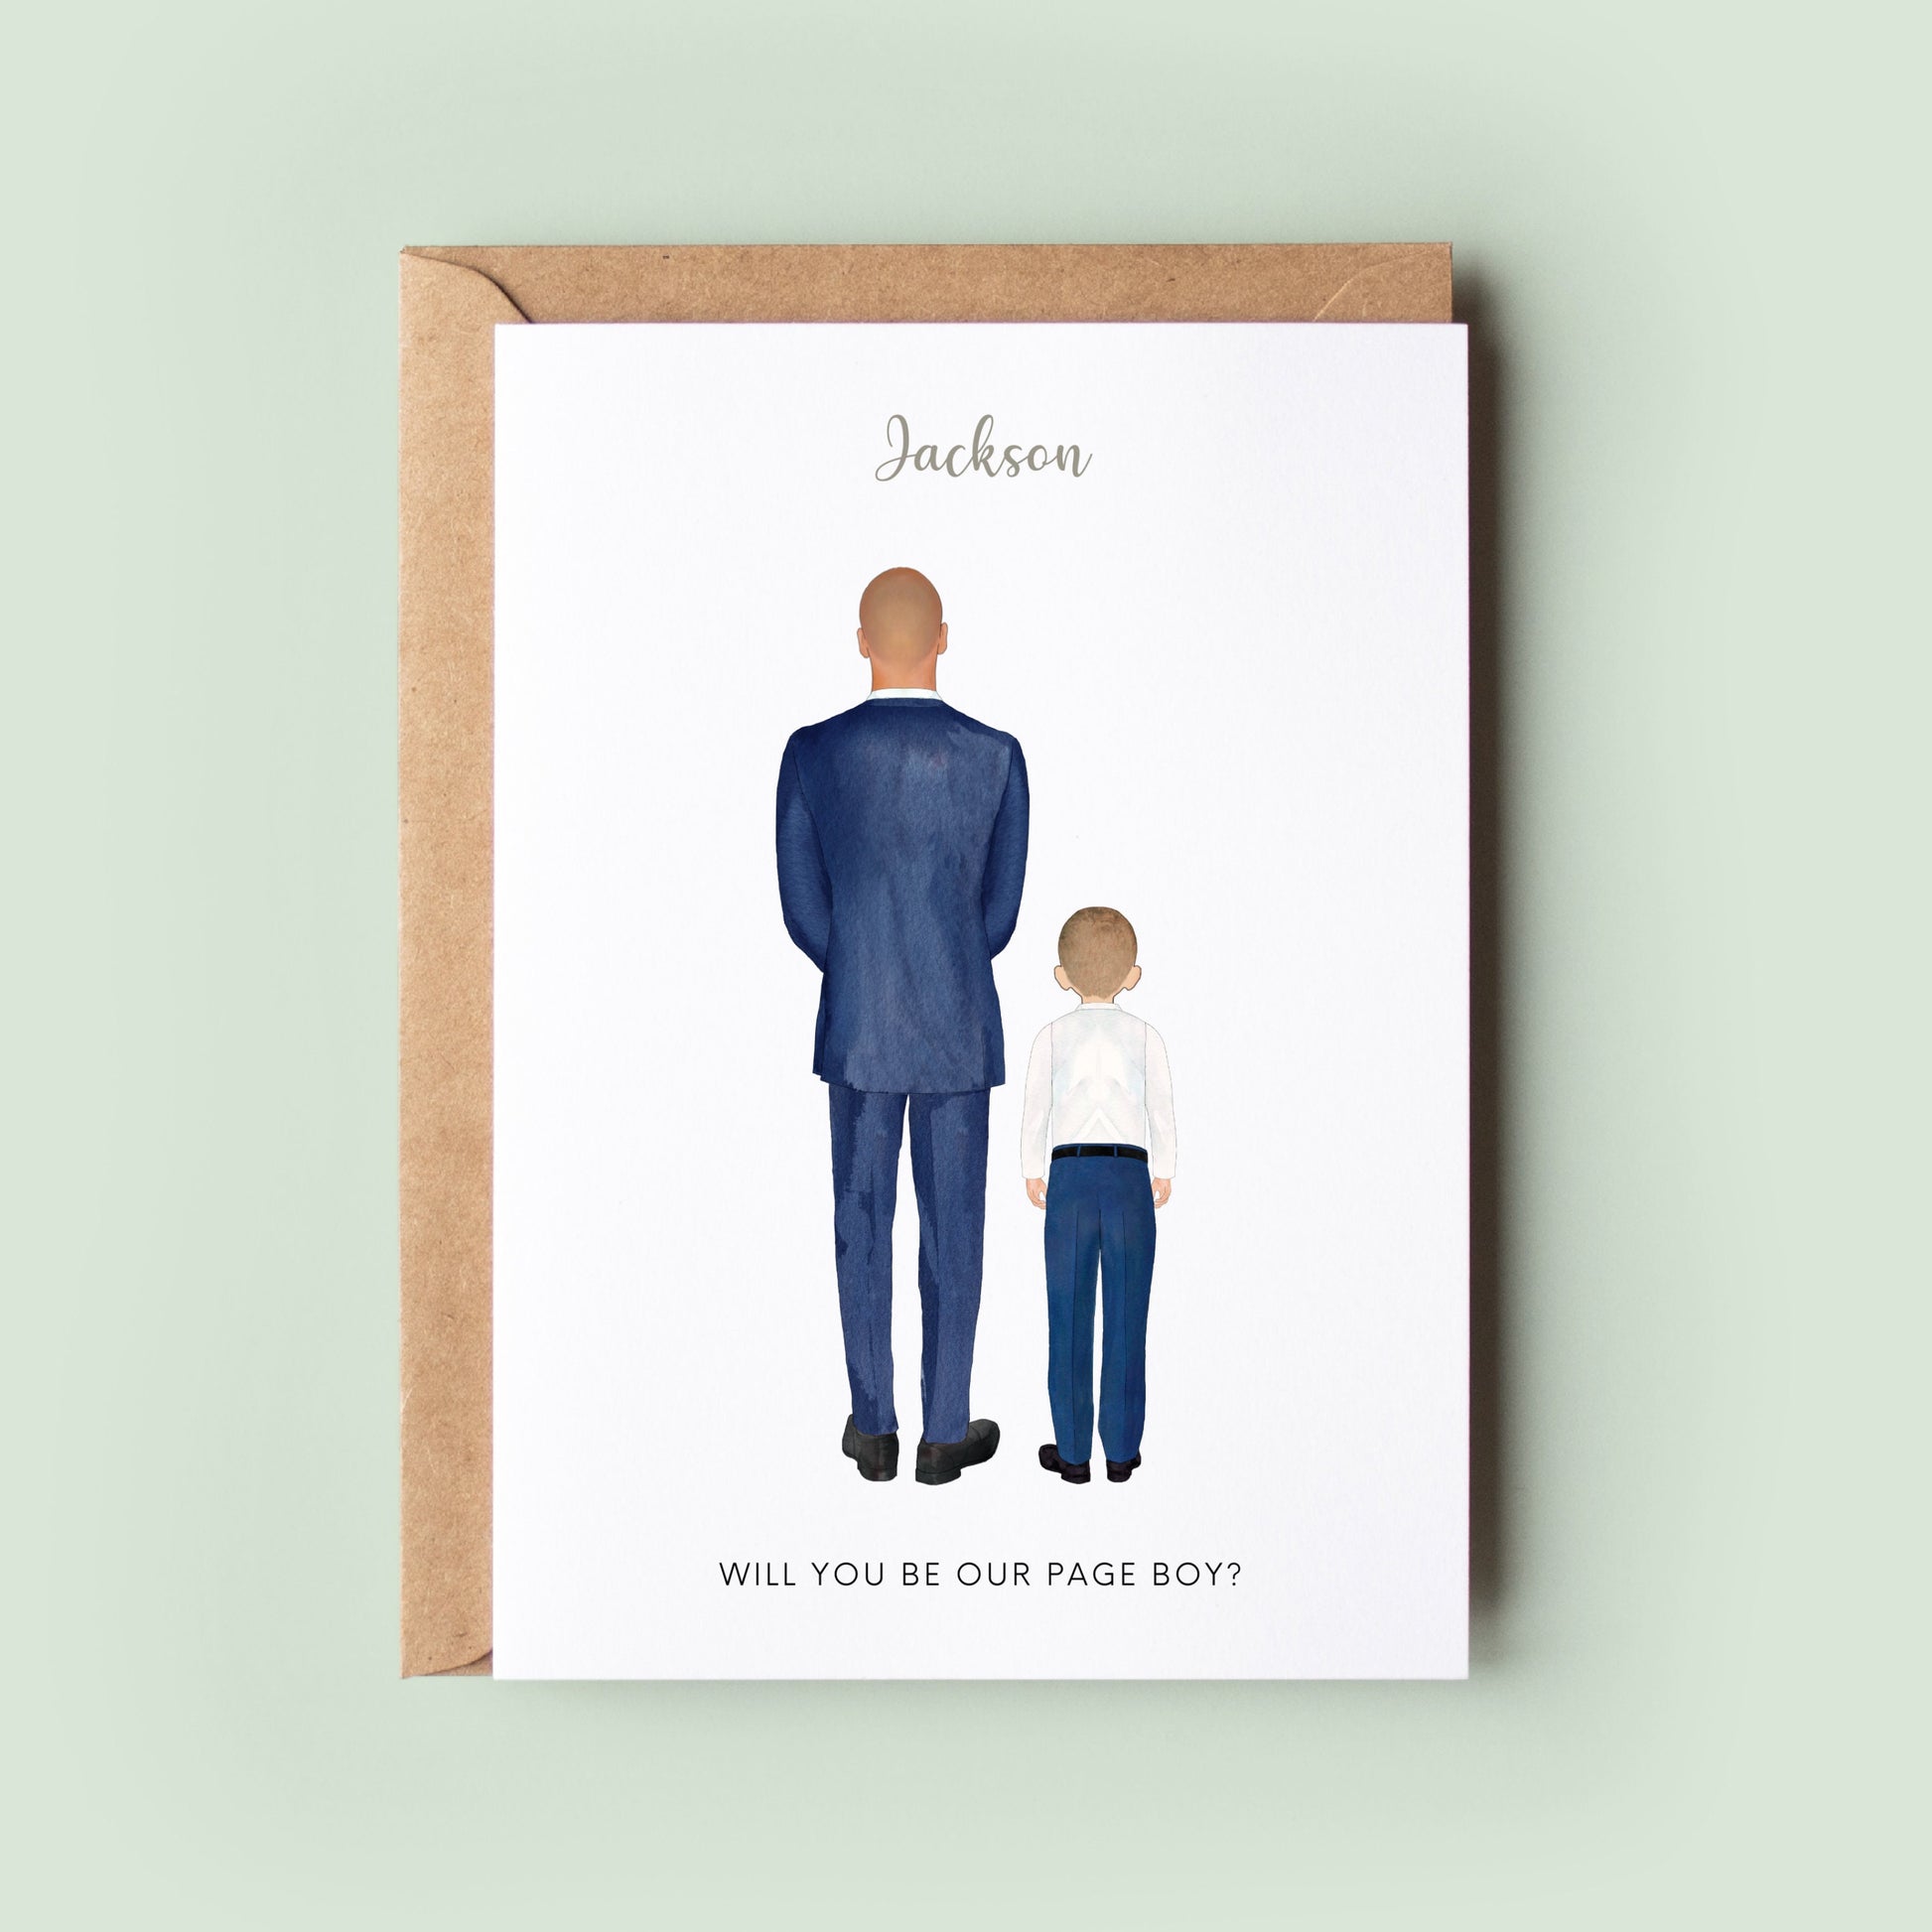 A personalised mini best man/page boy proposal card with options to customise the outfit, hairstyle, and skin tone of the illustrated figures.